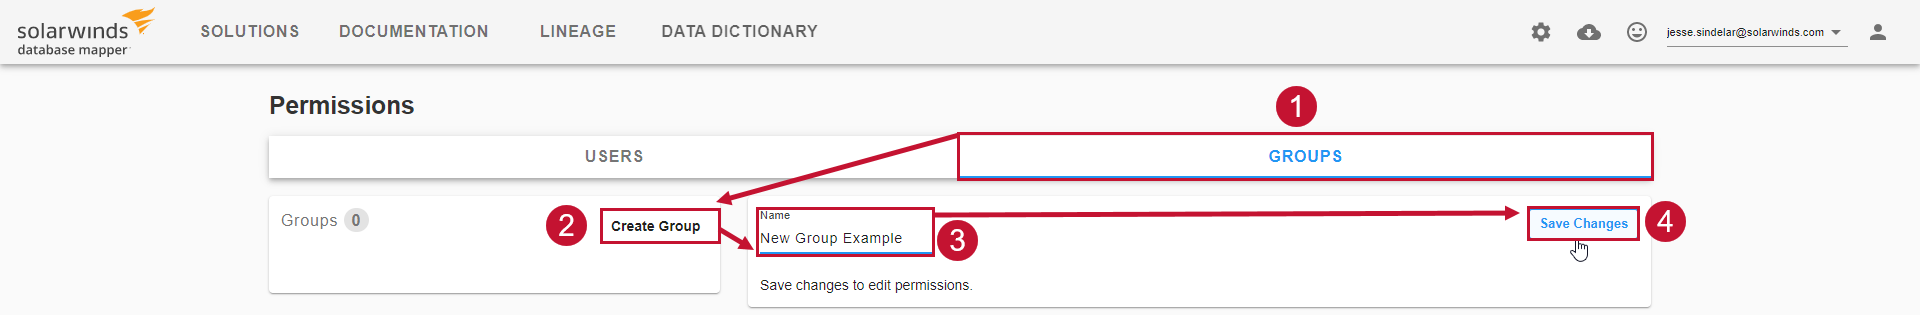 Database Mapper Permissions Groups tab create group